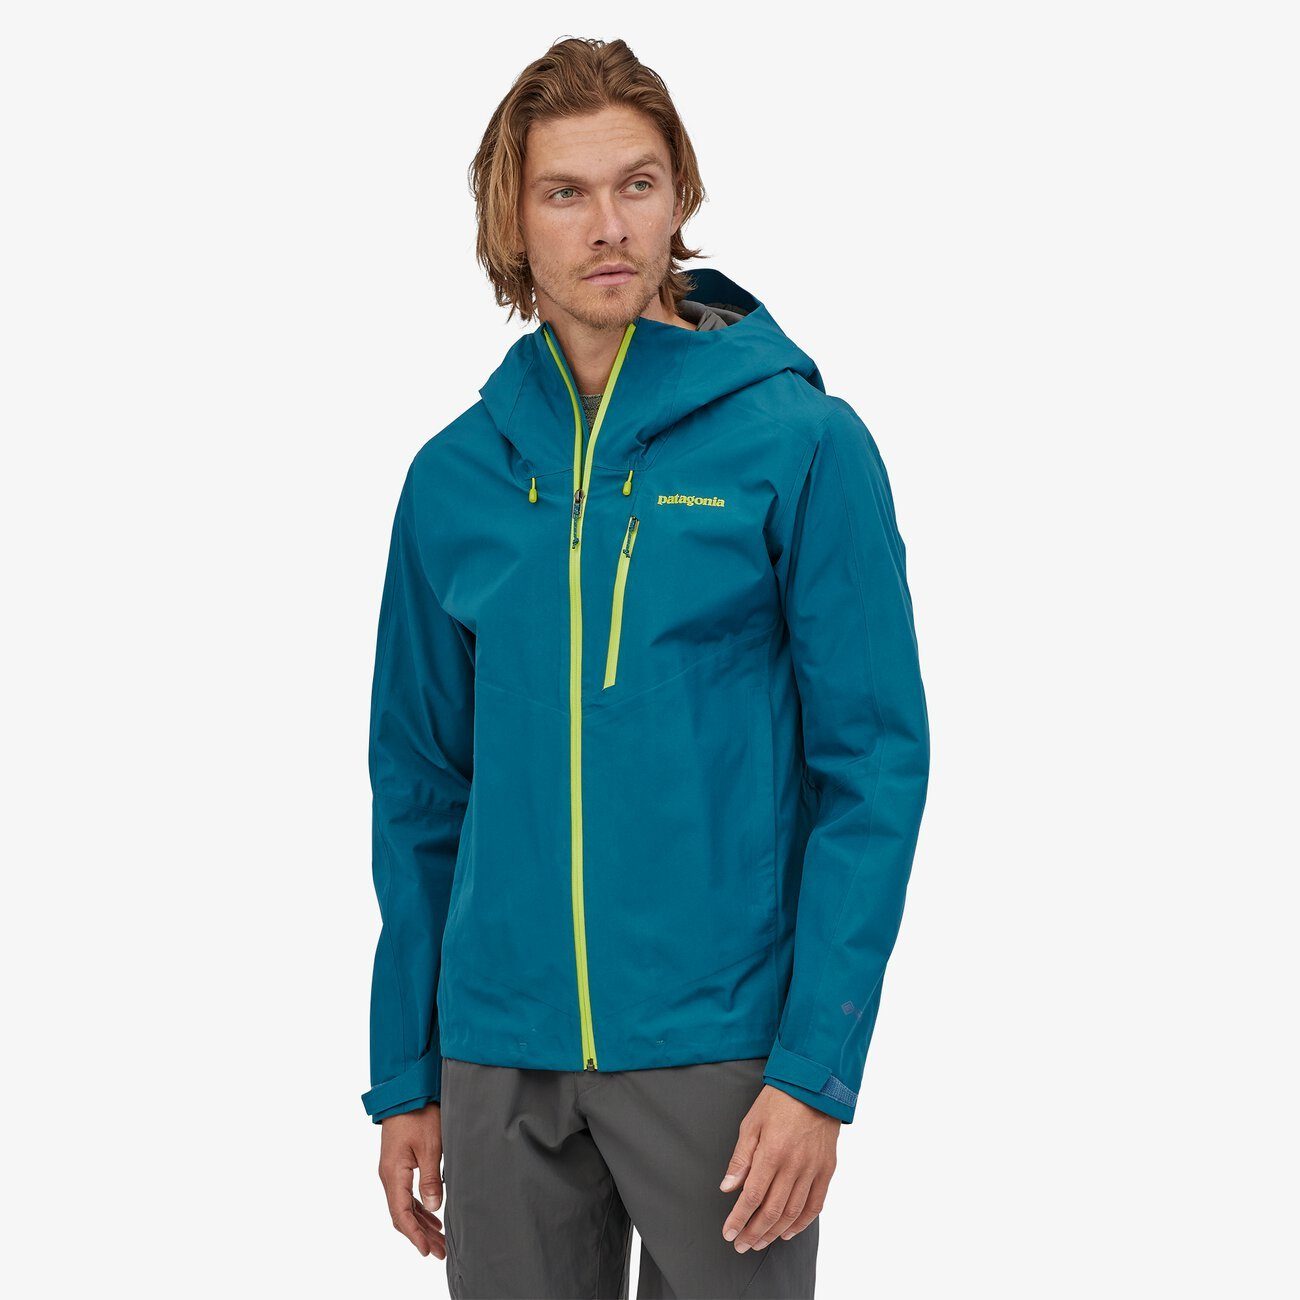 Patagonia Men's Calcite Shell Jacket - Gore-Tex - 100% Recycled Polyester, Crater Blue / S